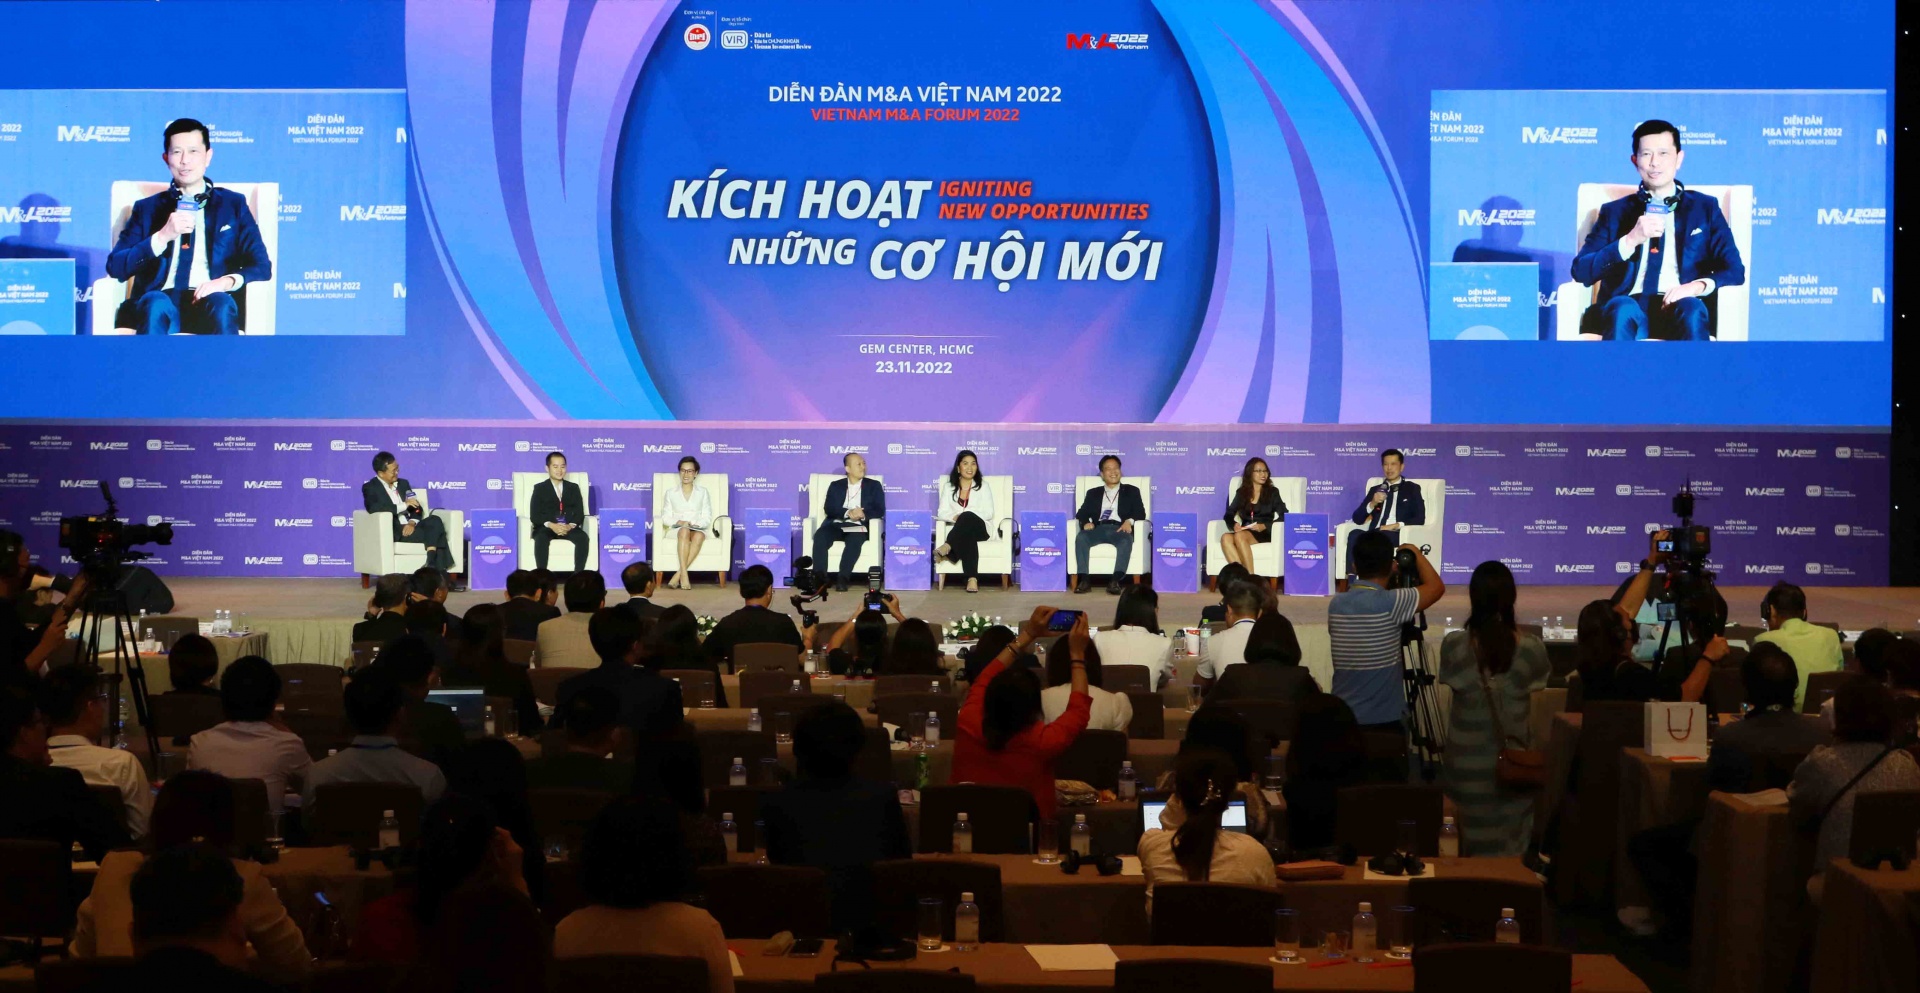 The second session of the Vietnam M&A Forum 2022